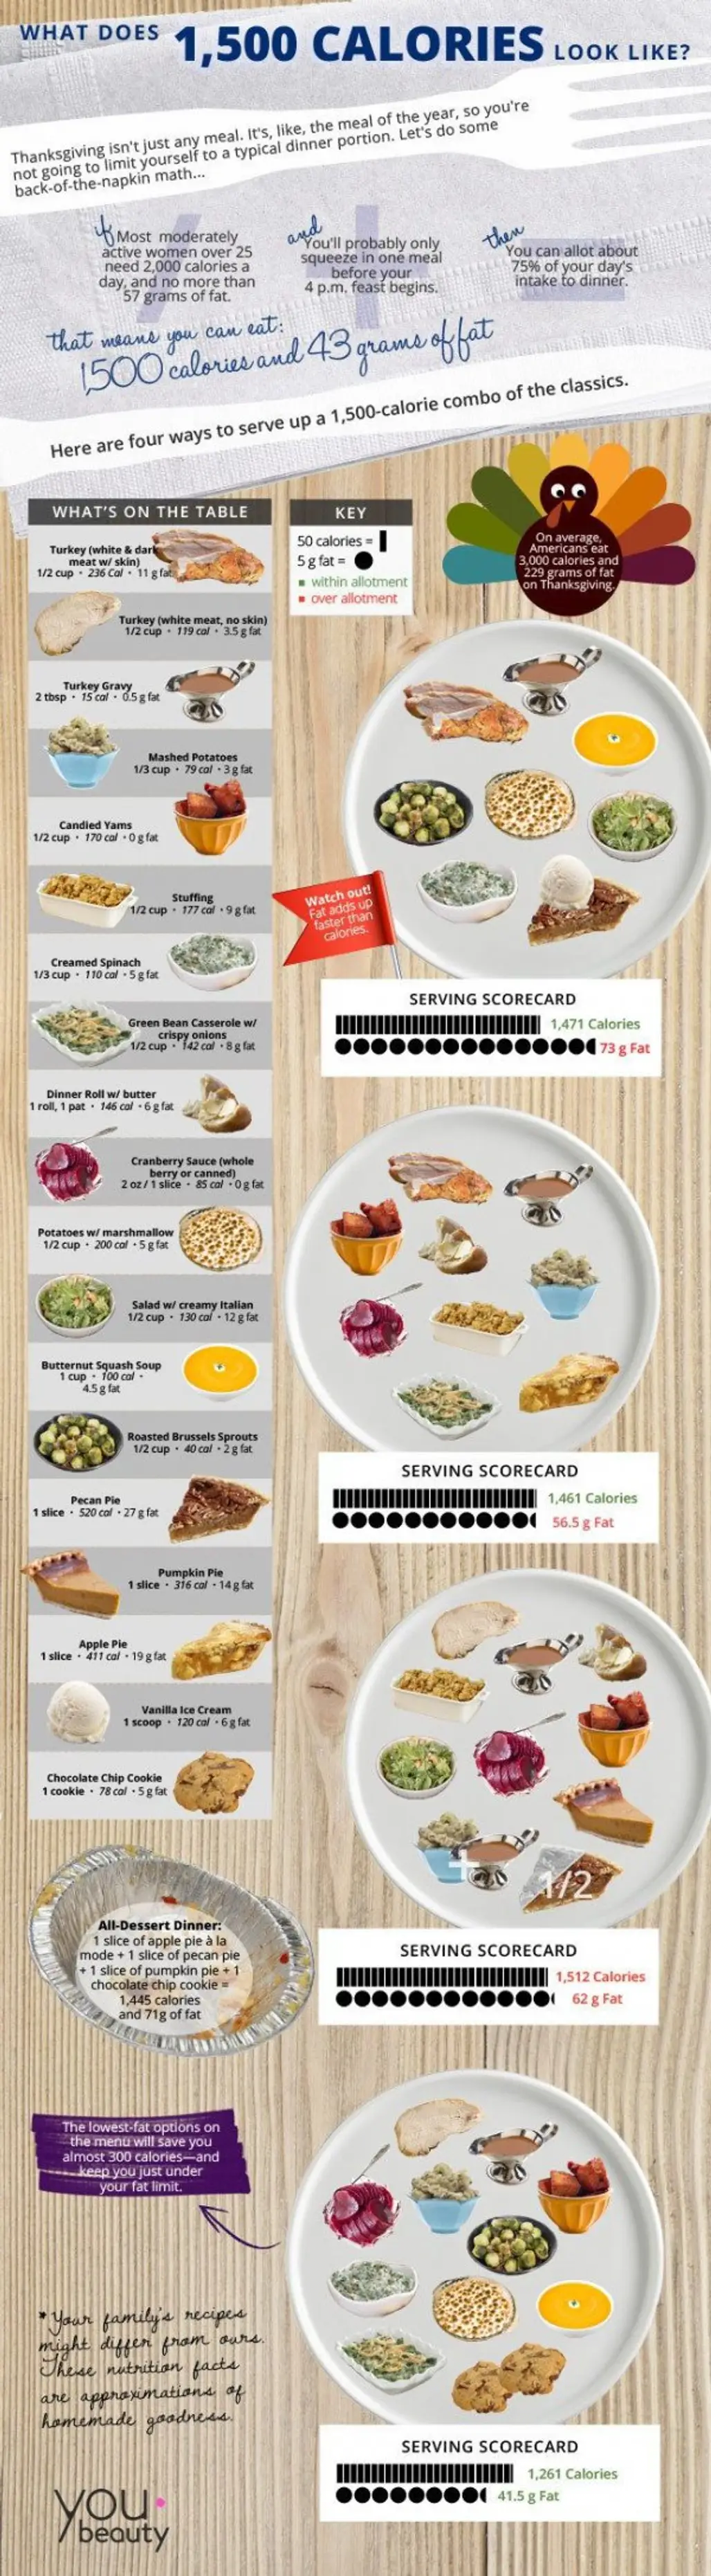 How Much Should You Eat on Thanksgiving?